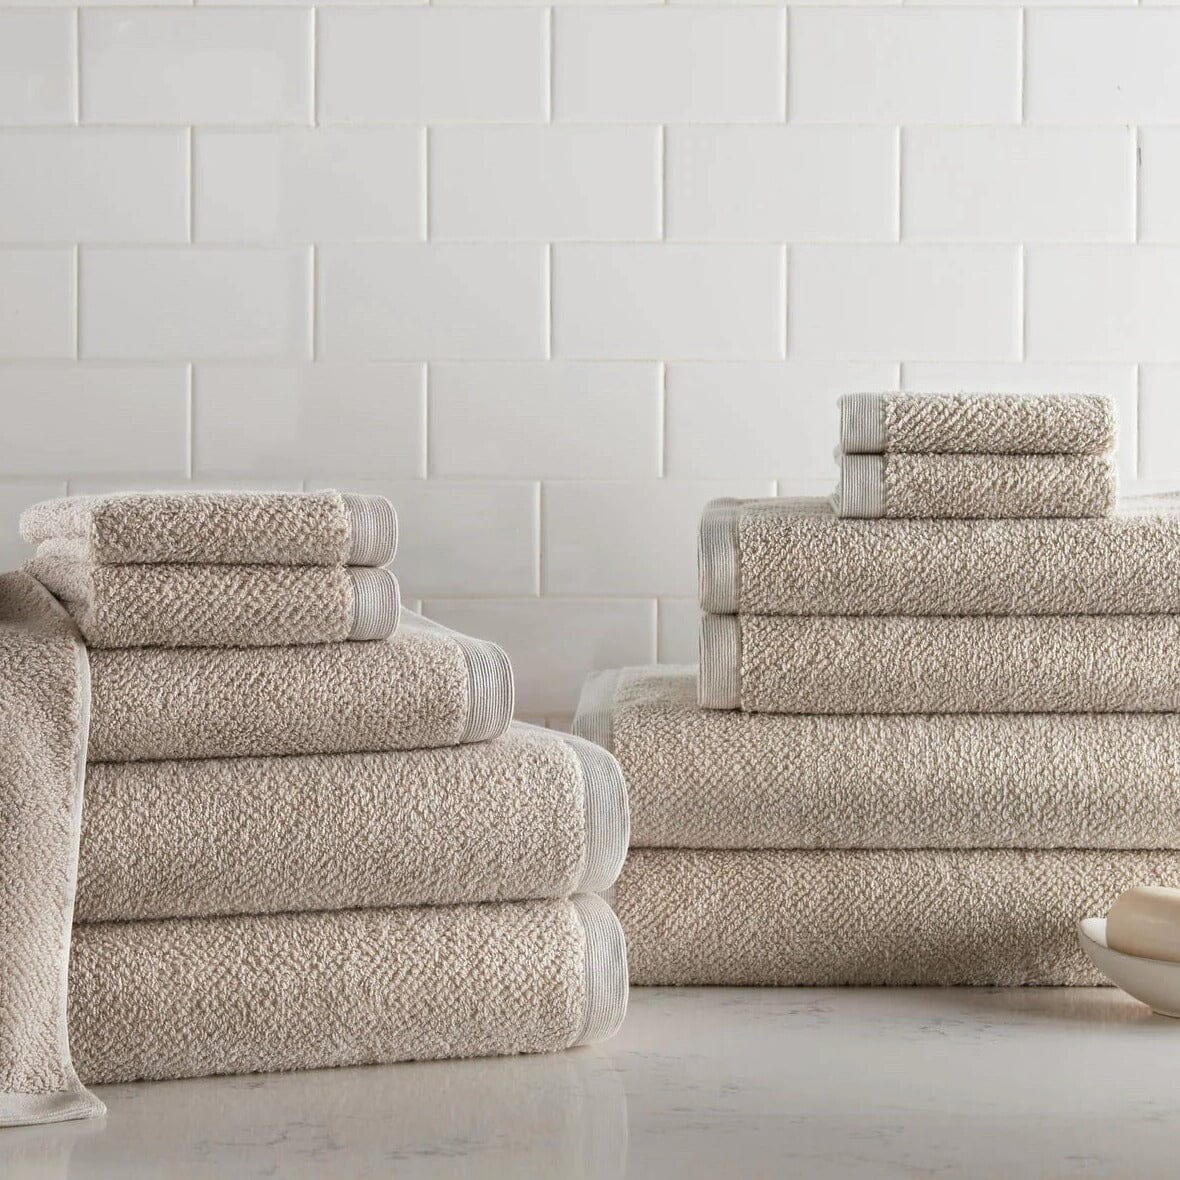 Peacock Alley Bath Towels | Jubilee Towels in Linen Cotton Terry